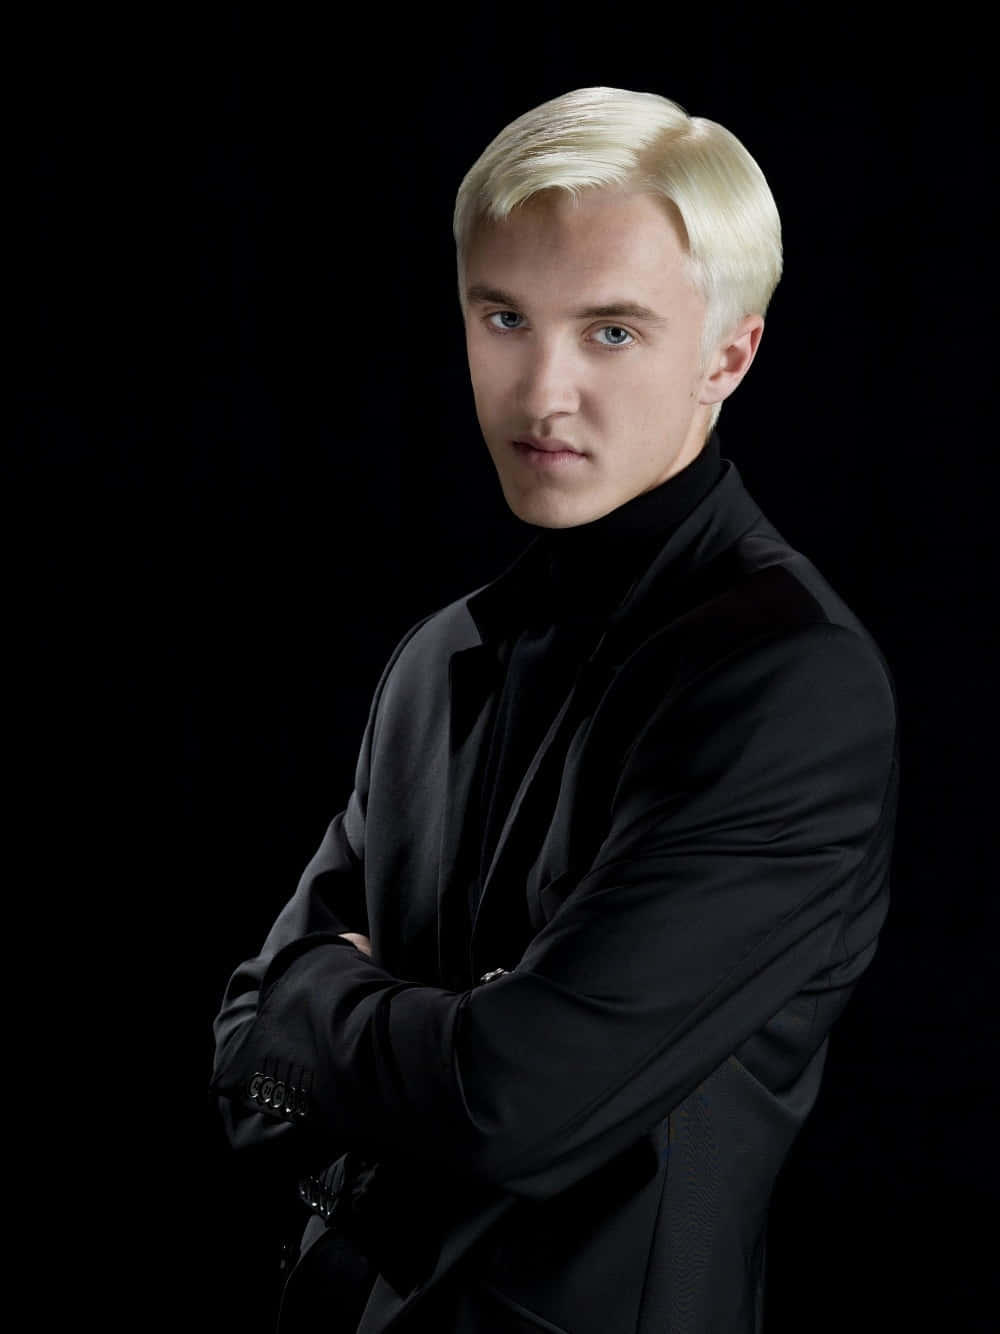 Draco Malfoy looking suave